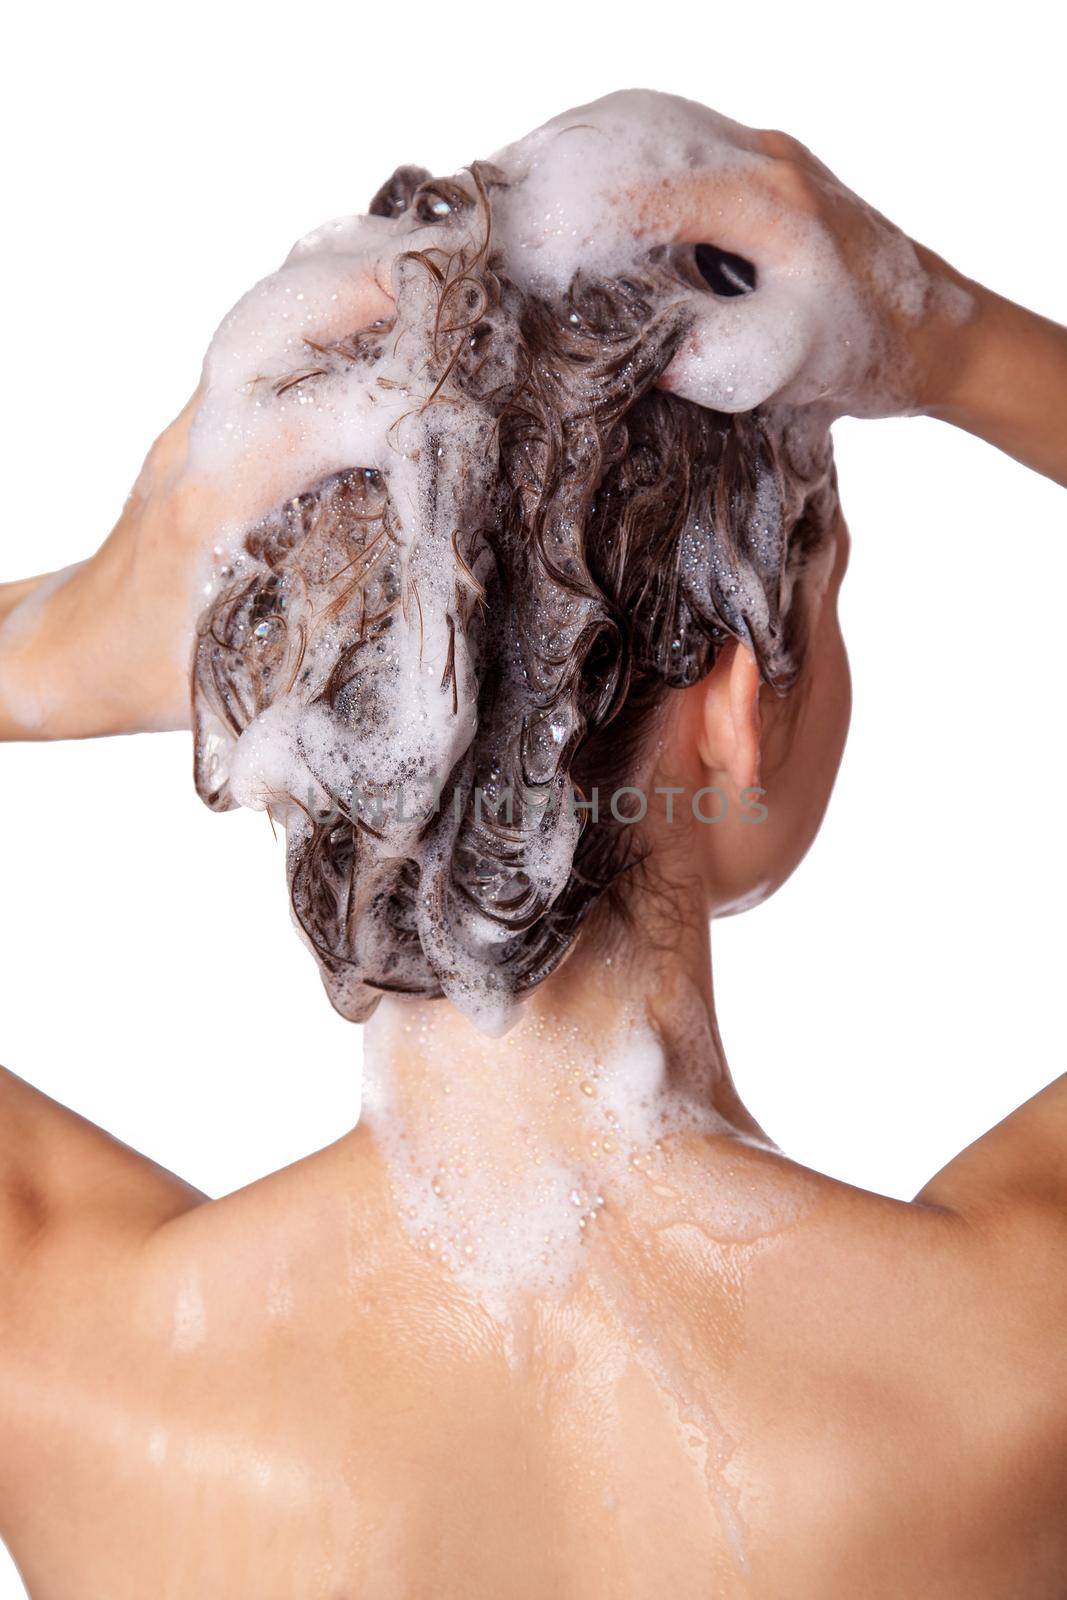 Beautiful woman taking a shower and shampooing her hair. washing hair with Shampoo. studio shot isolated on white background.